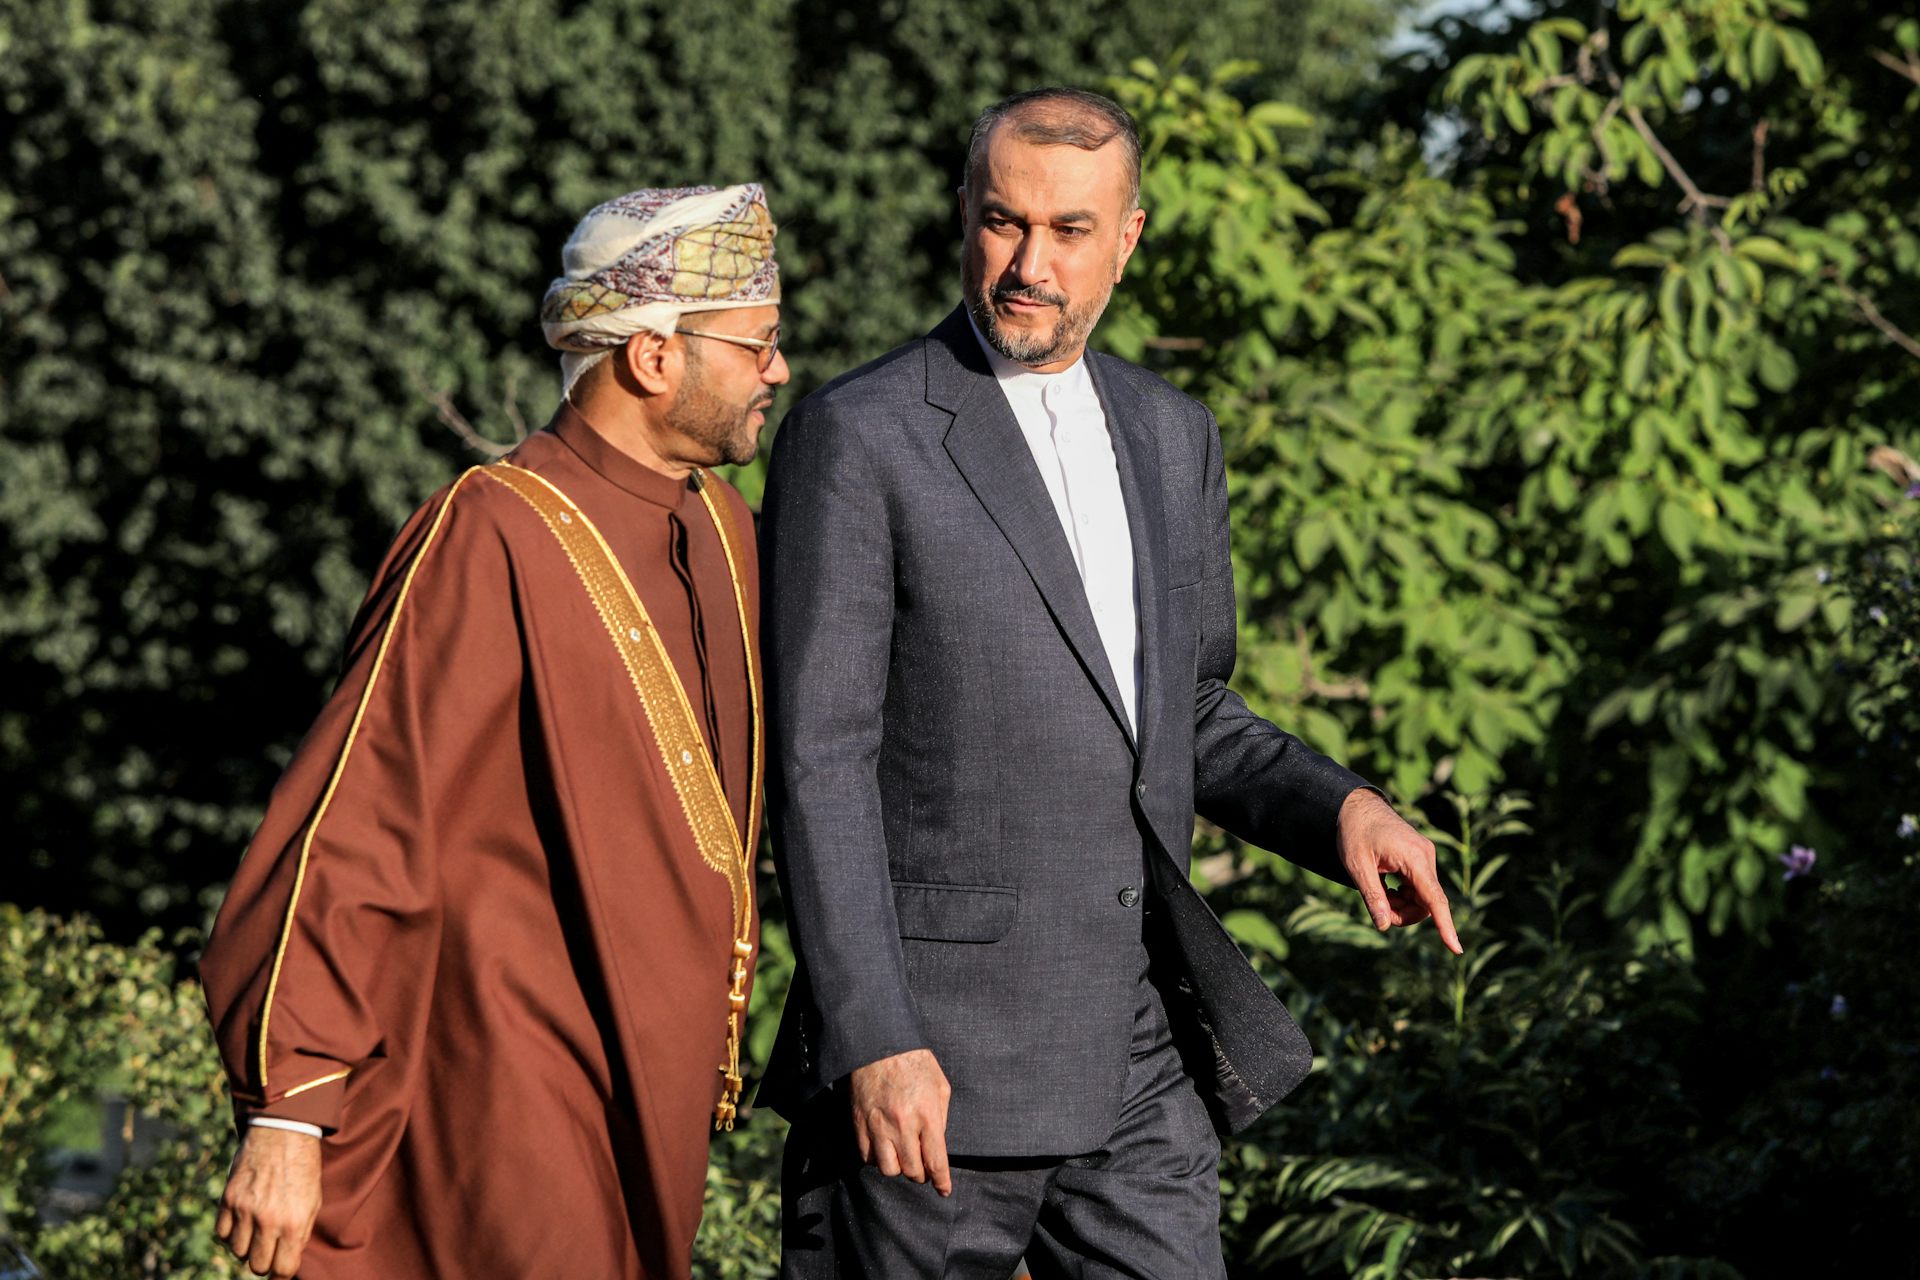 Oman Serves as a Crucial Back Channel Between Iran and the Us as Tensions Flare in the Middle East